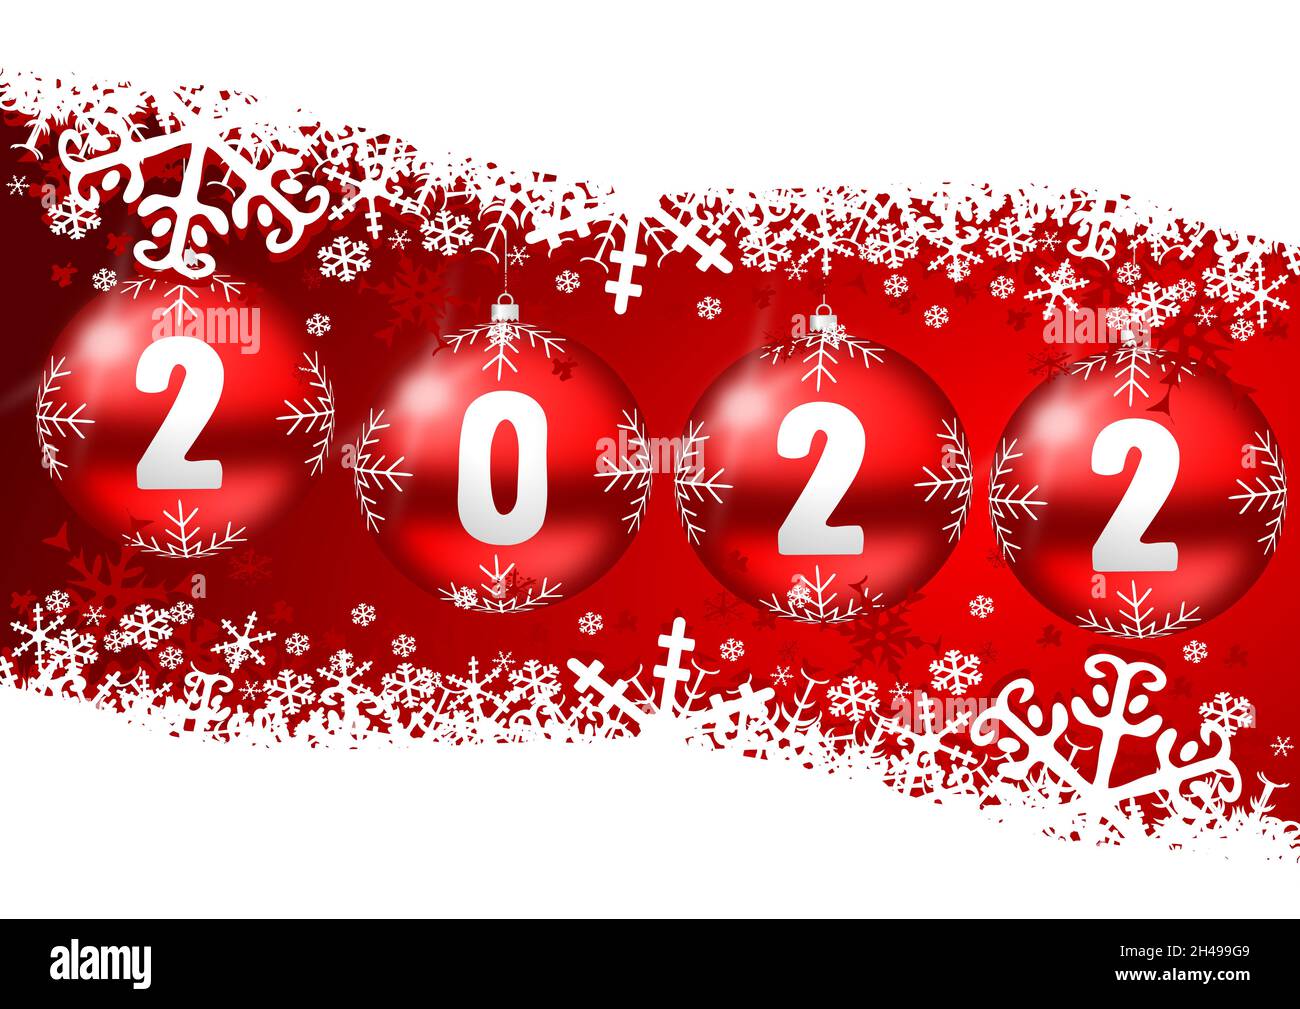 Happy new year 2022 greeting card with christmas red balls and white snowflakes, xmas background, winter illustration Stock Photo